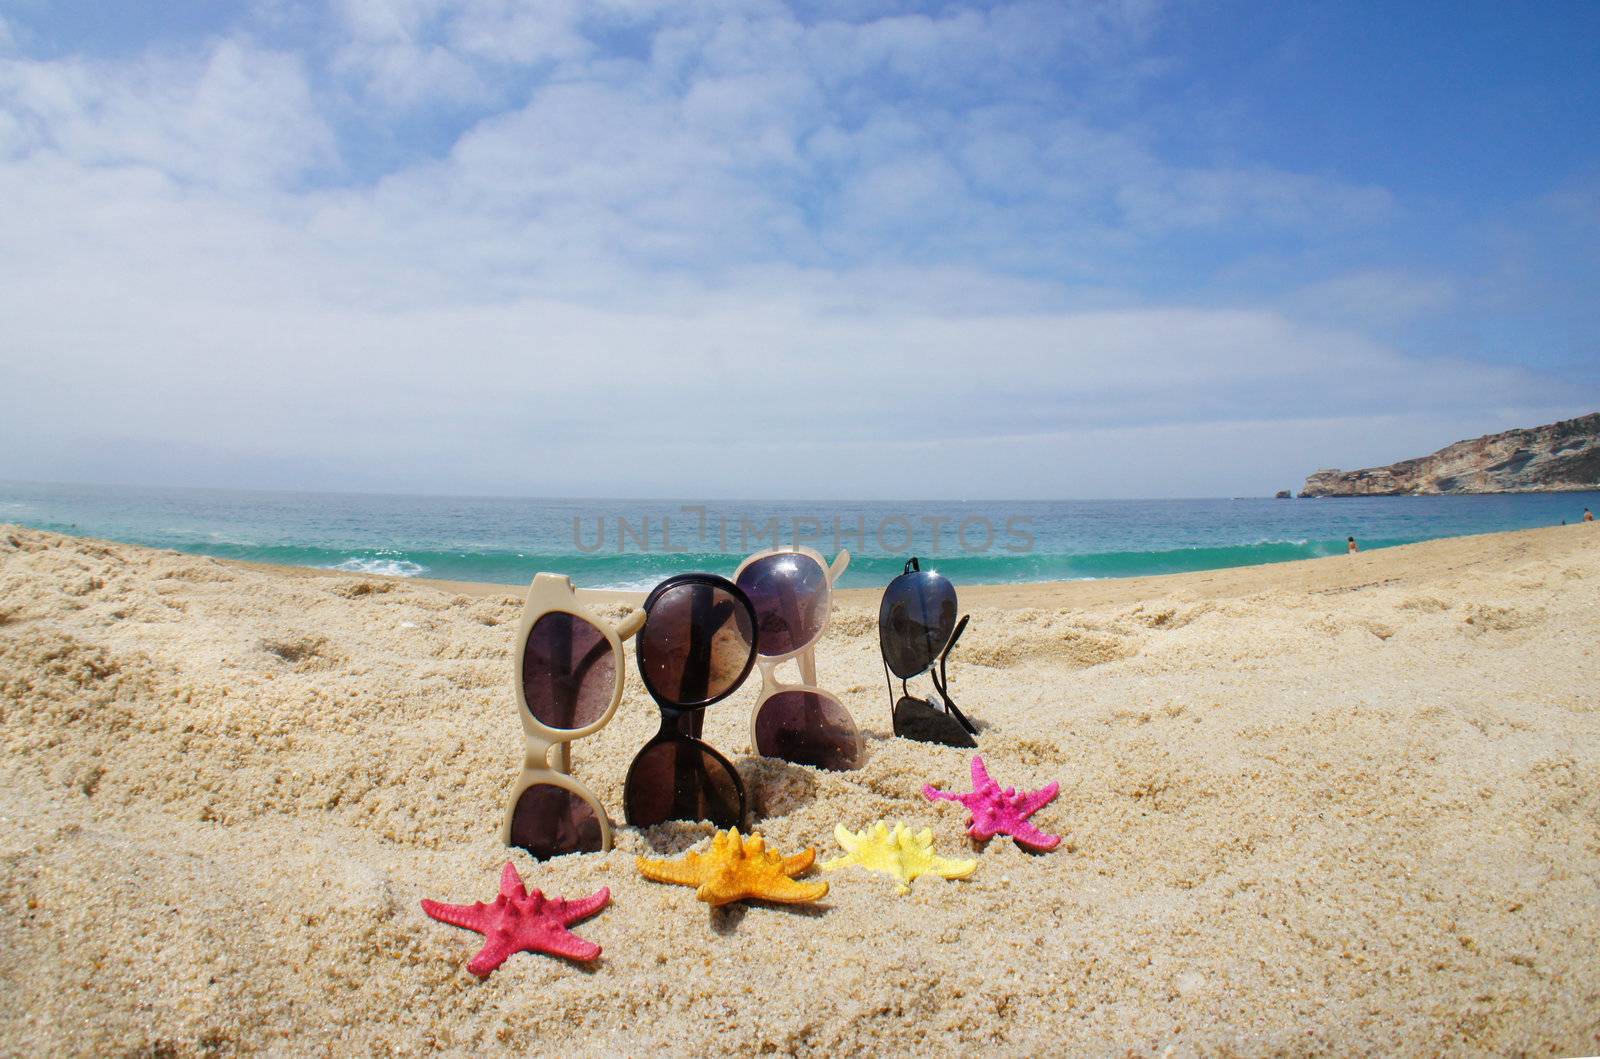 Four pairs of sunglasses on the beach  by tanouchka